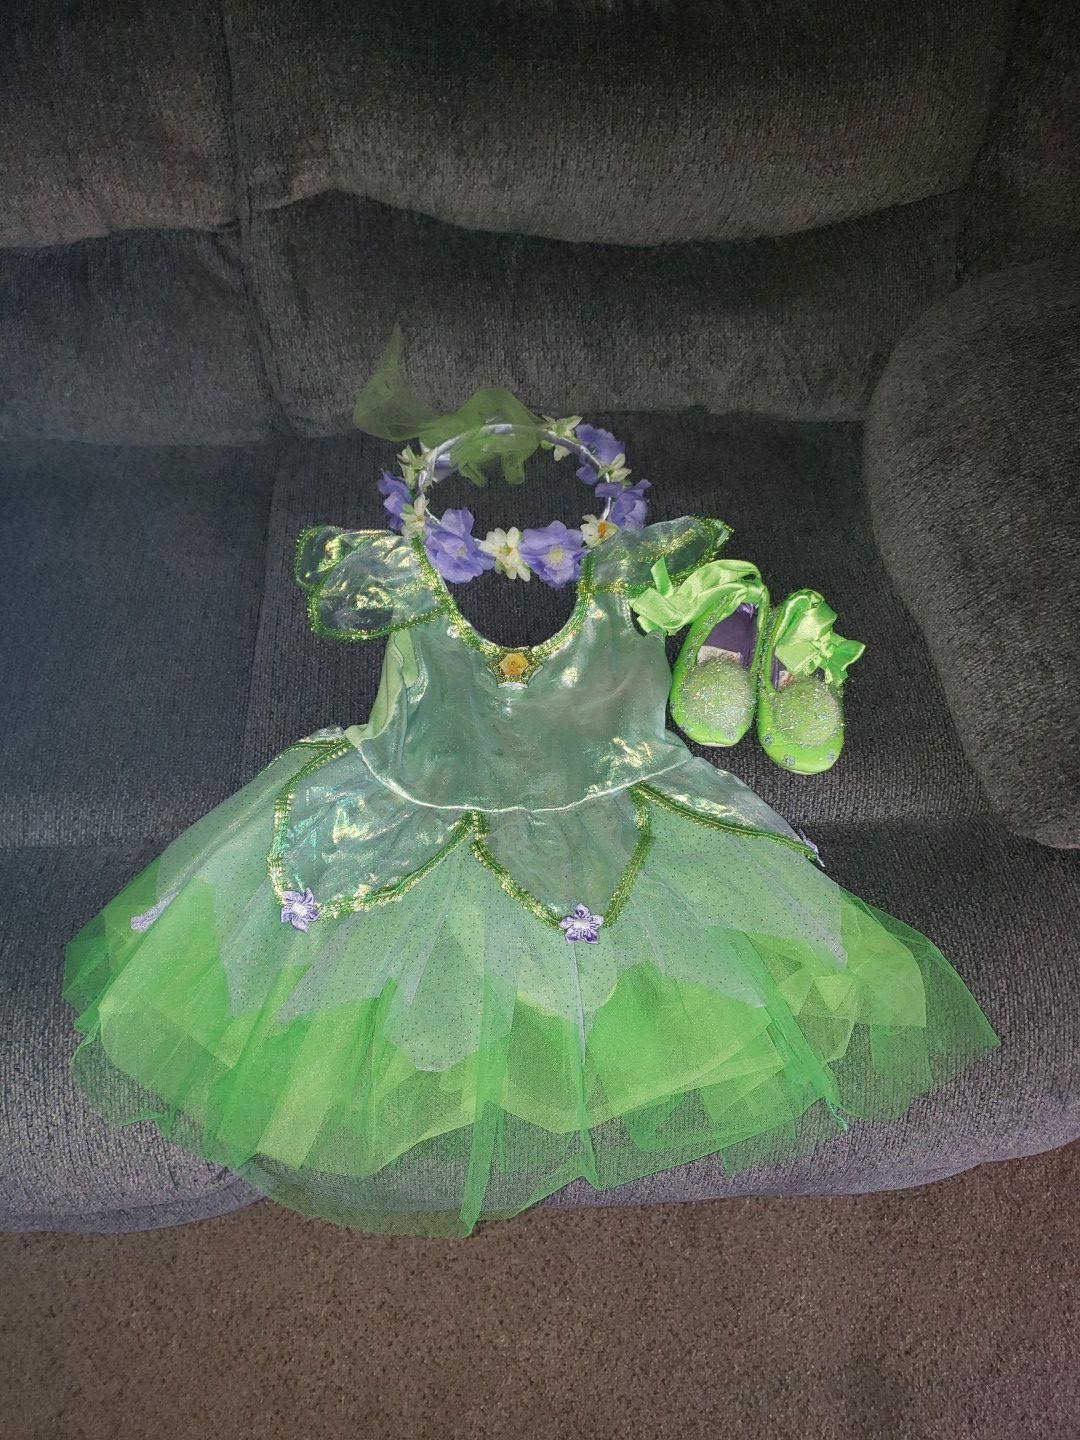 Tinkerbell outfit and headpiece